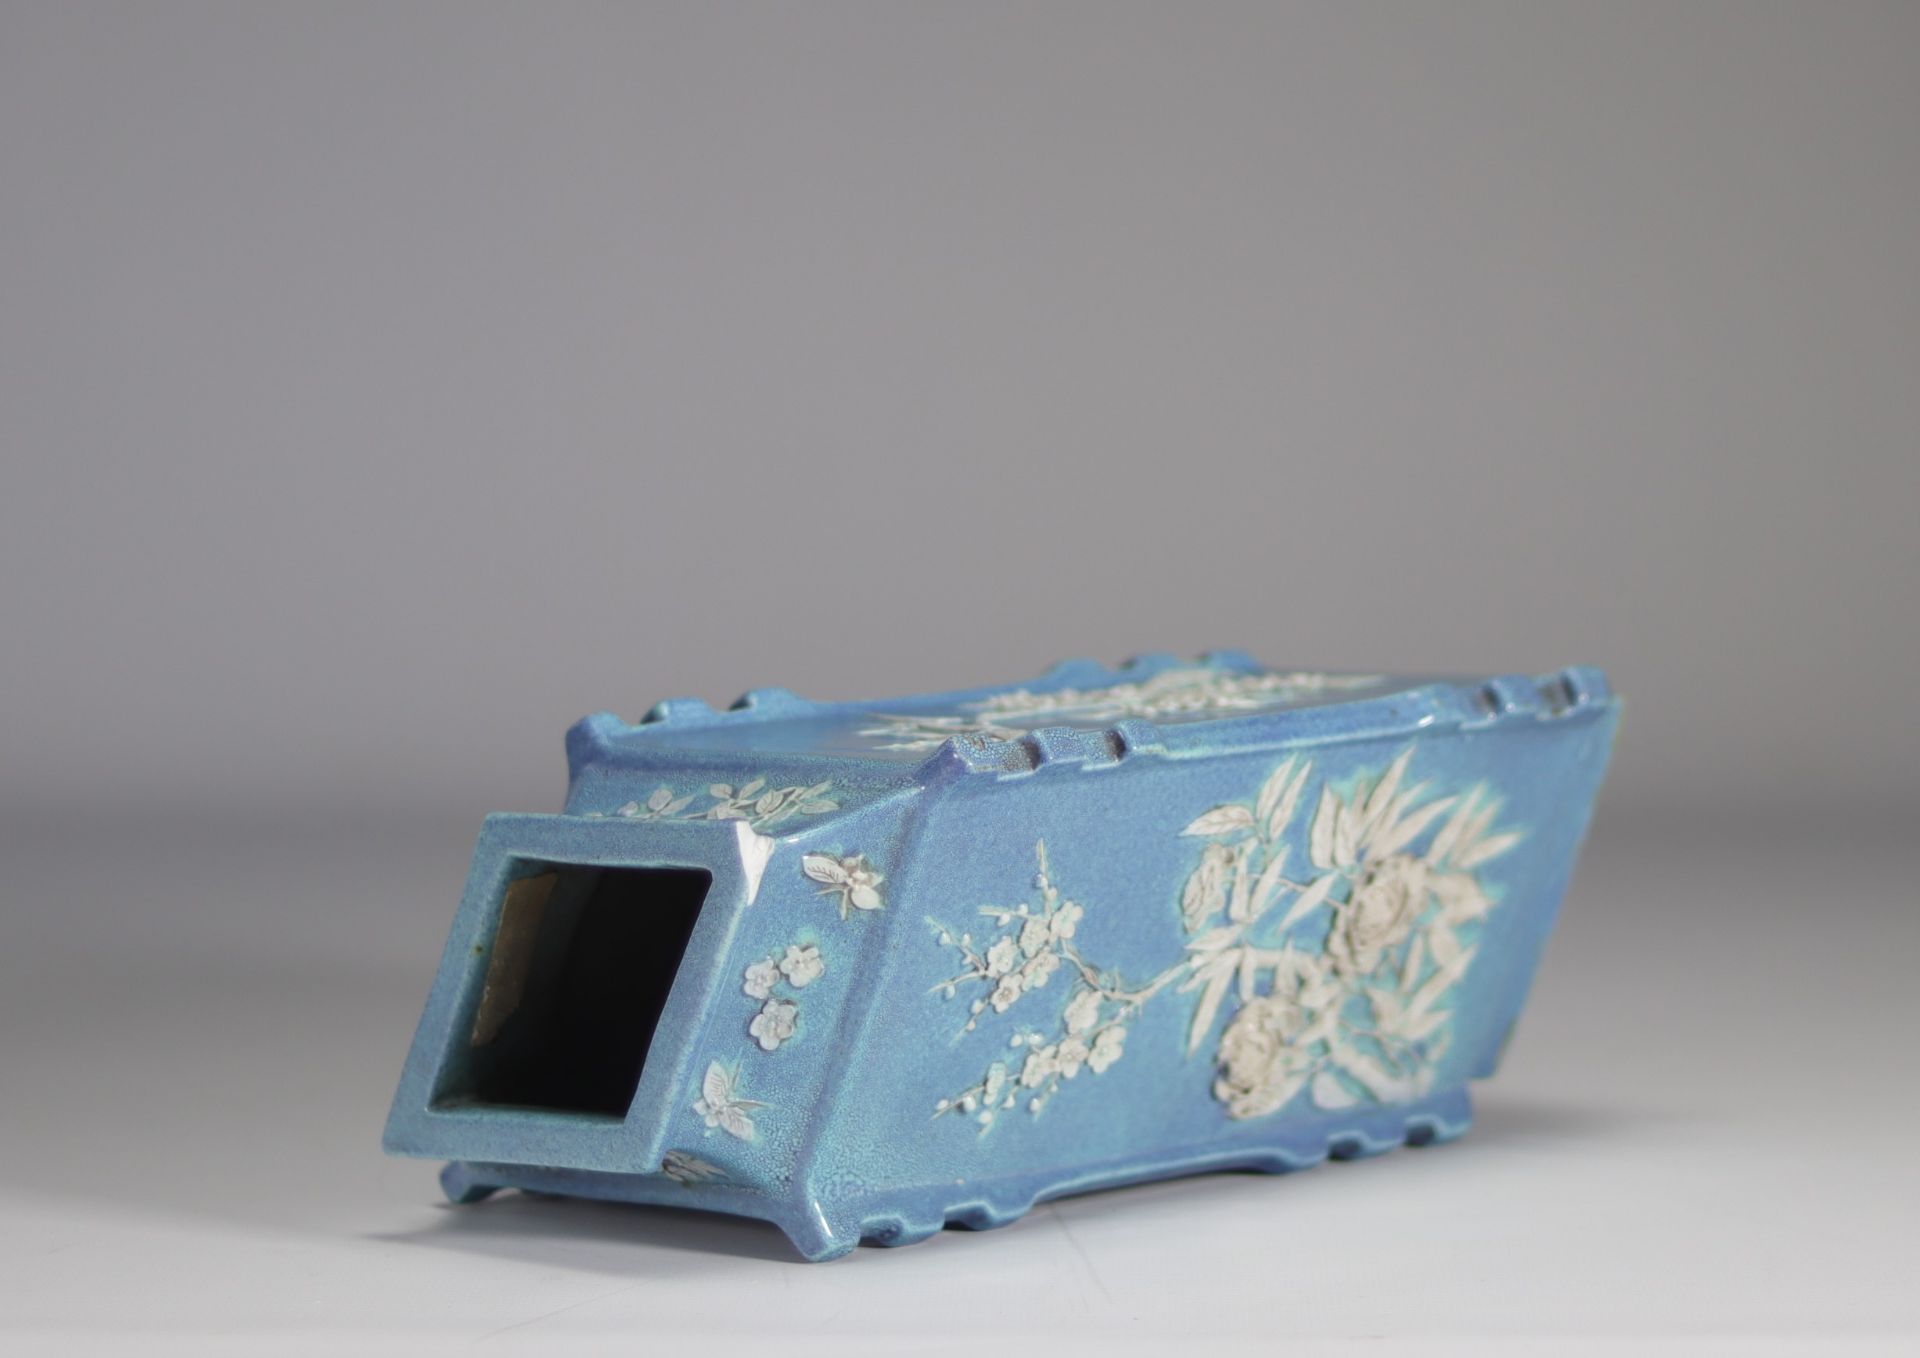 A Chinese porcelain vase decorated with flowers in relief on a light blue background from Qing perio - Image 4 of 5